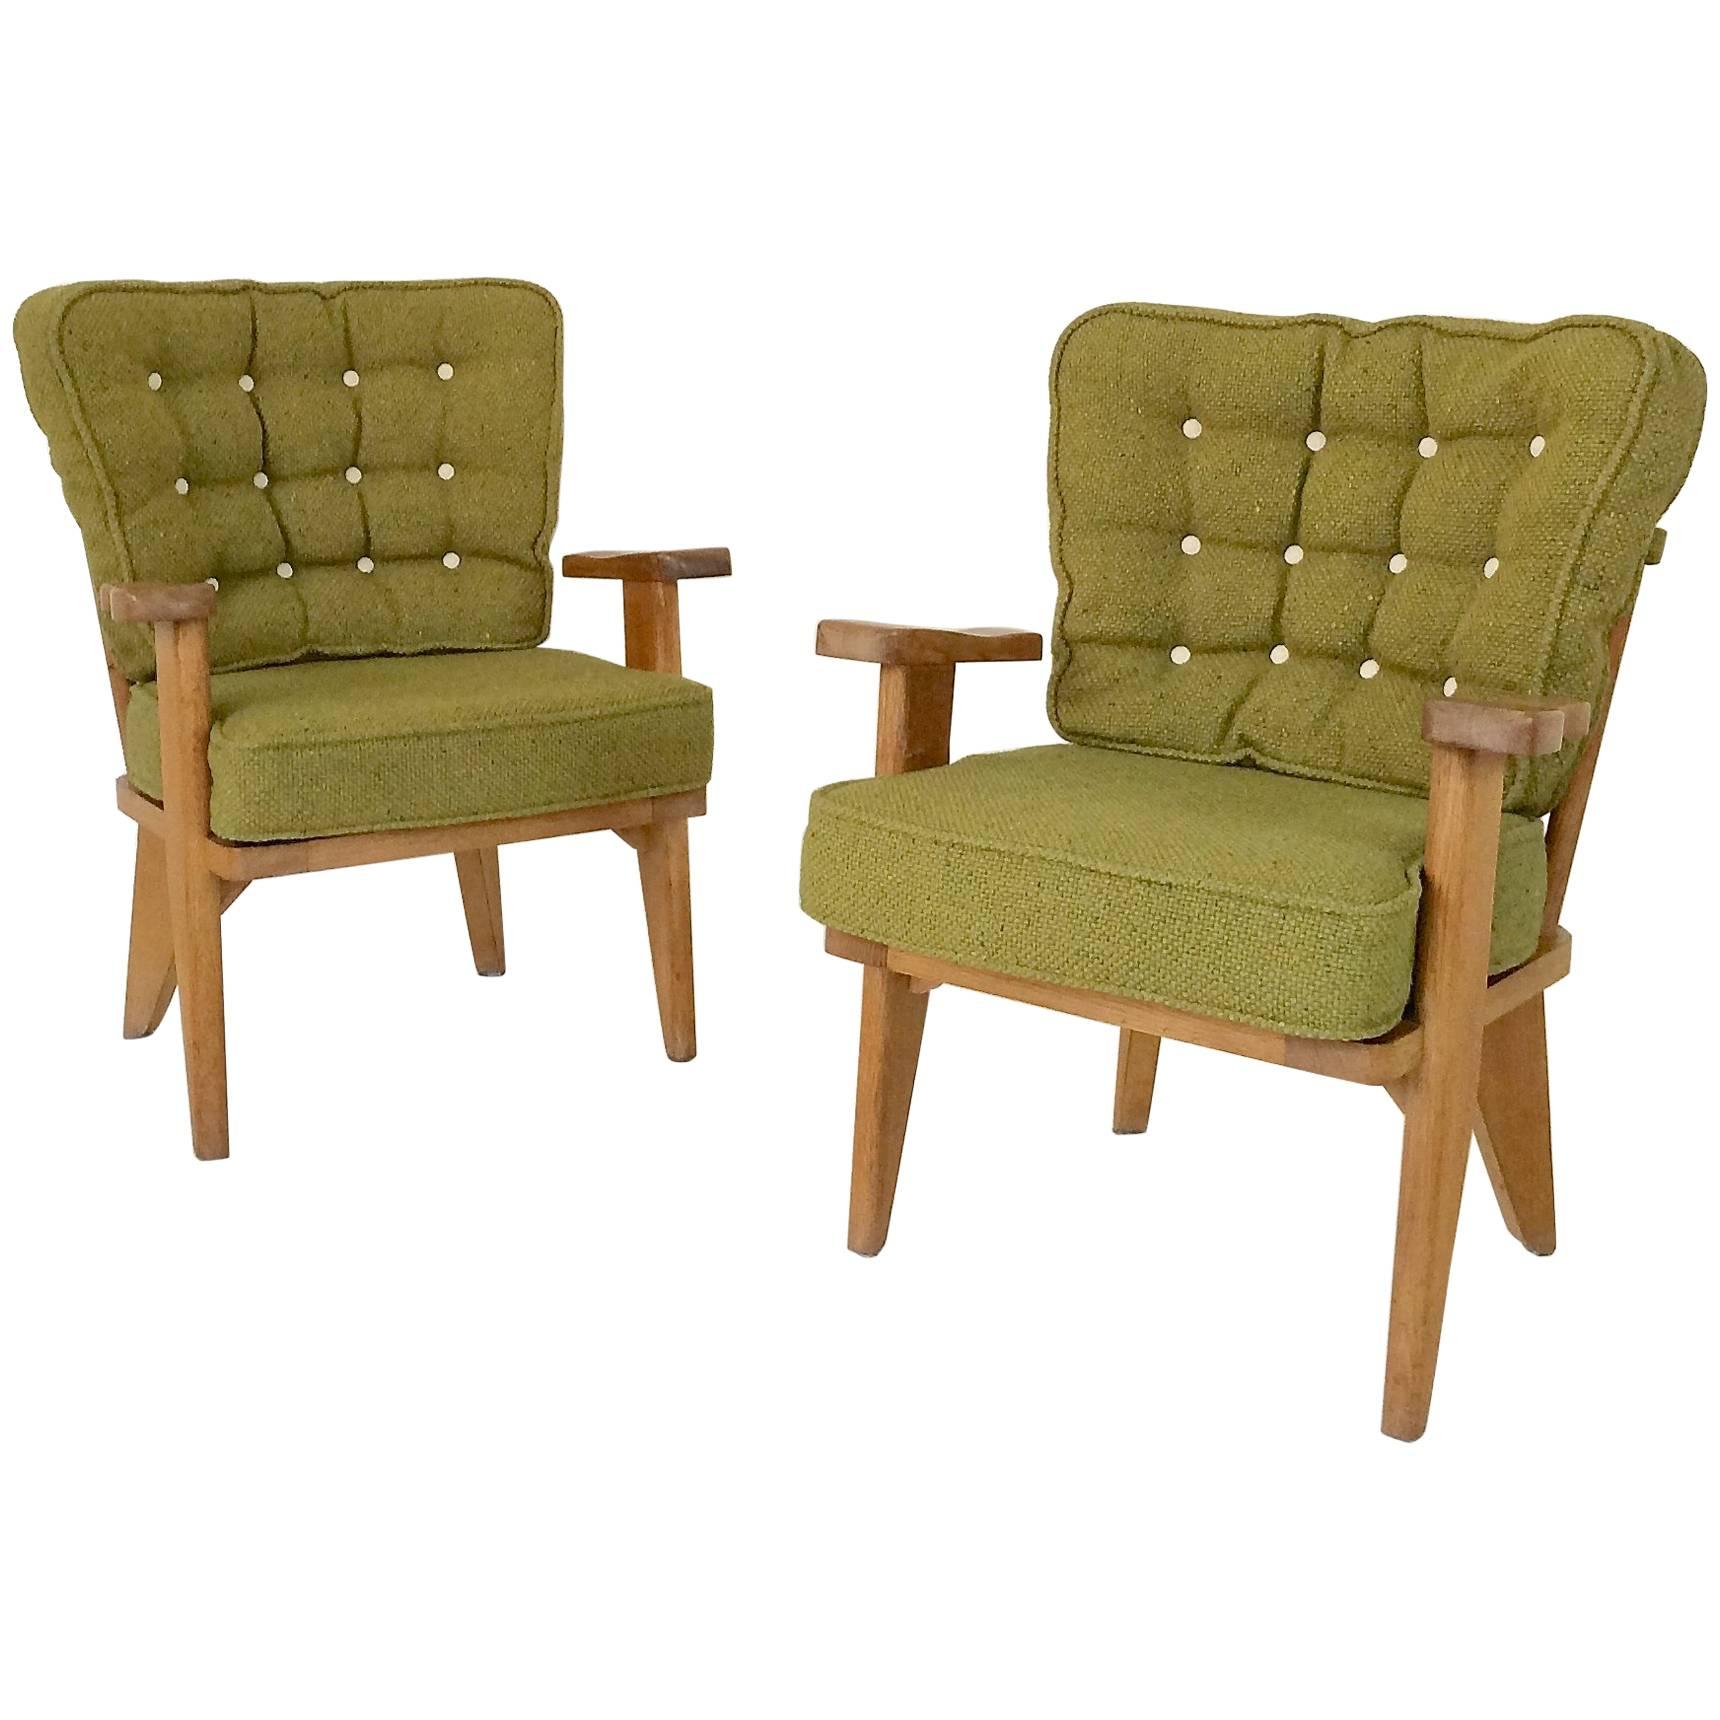 Guillerme et Chambron Pair of Armchairs, circa 1950, France